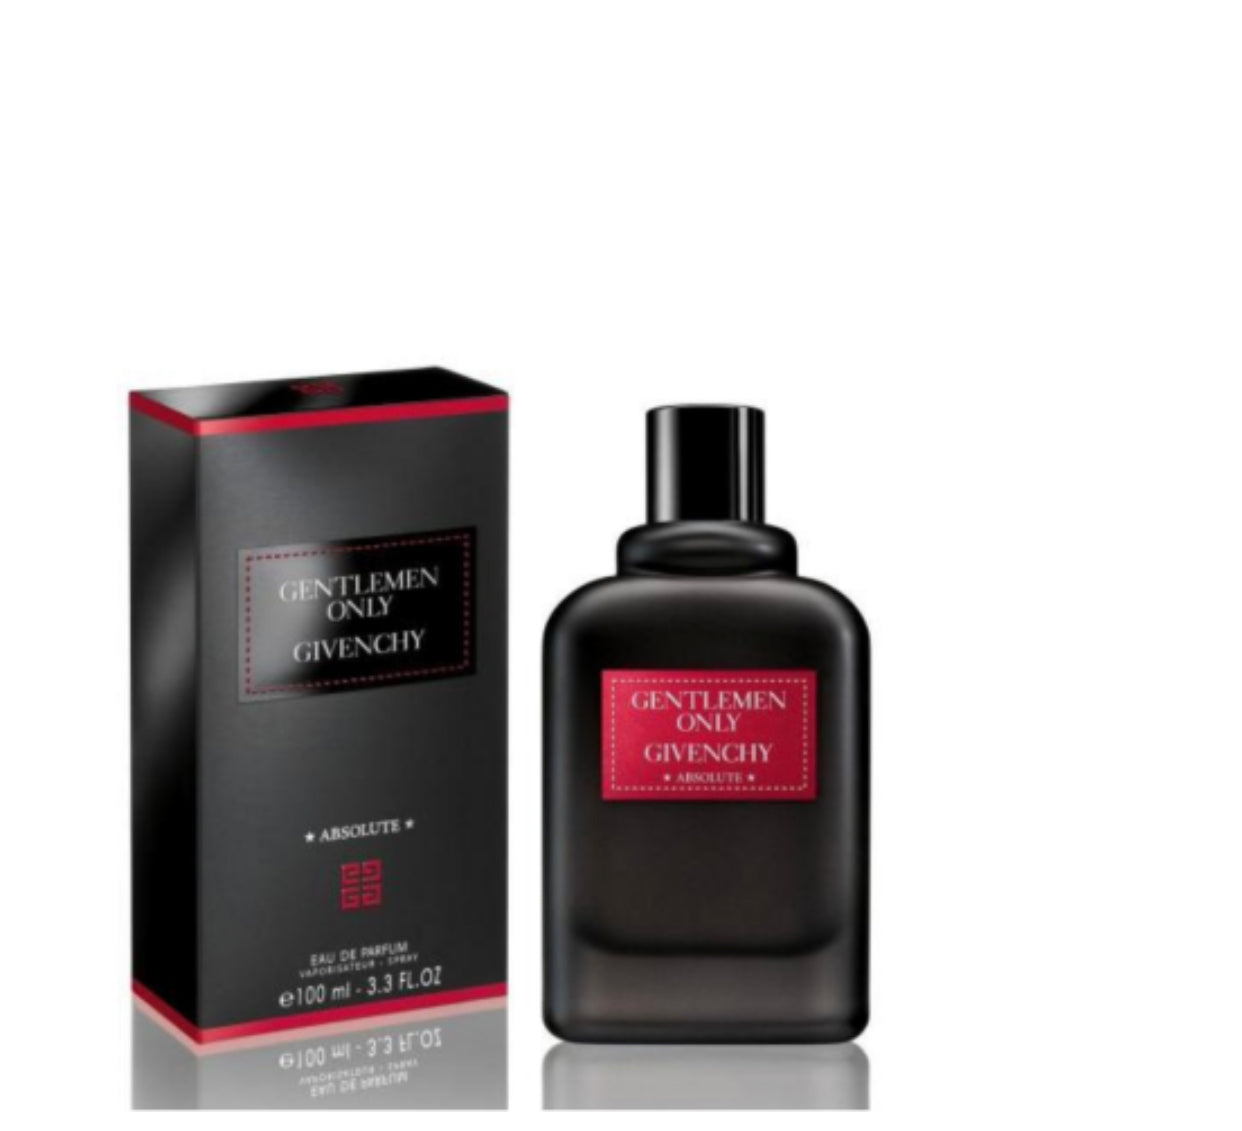 Only absolute. Givenchy Gentlemen only absolute,100ml. Givenchy only absolute. Givenchy Gentlemen only absolute. Givenchy Gentlemen only Casual Chic.